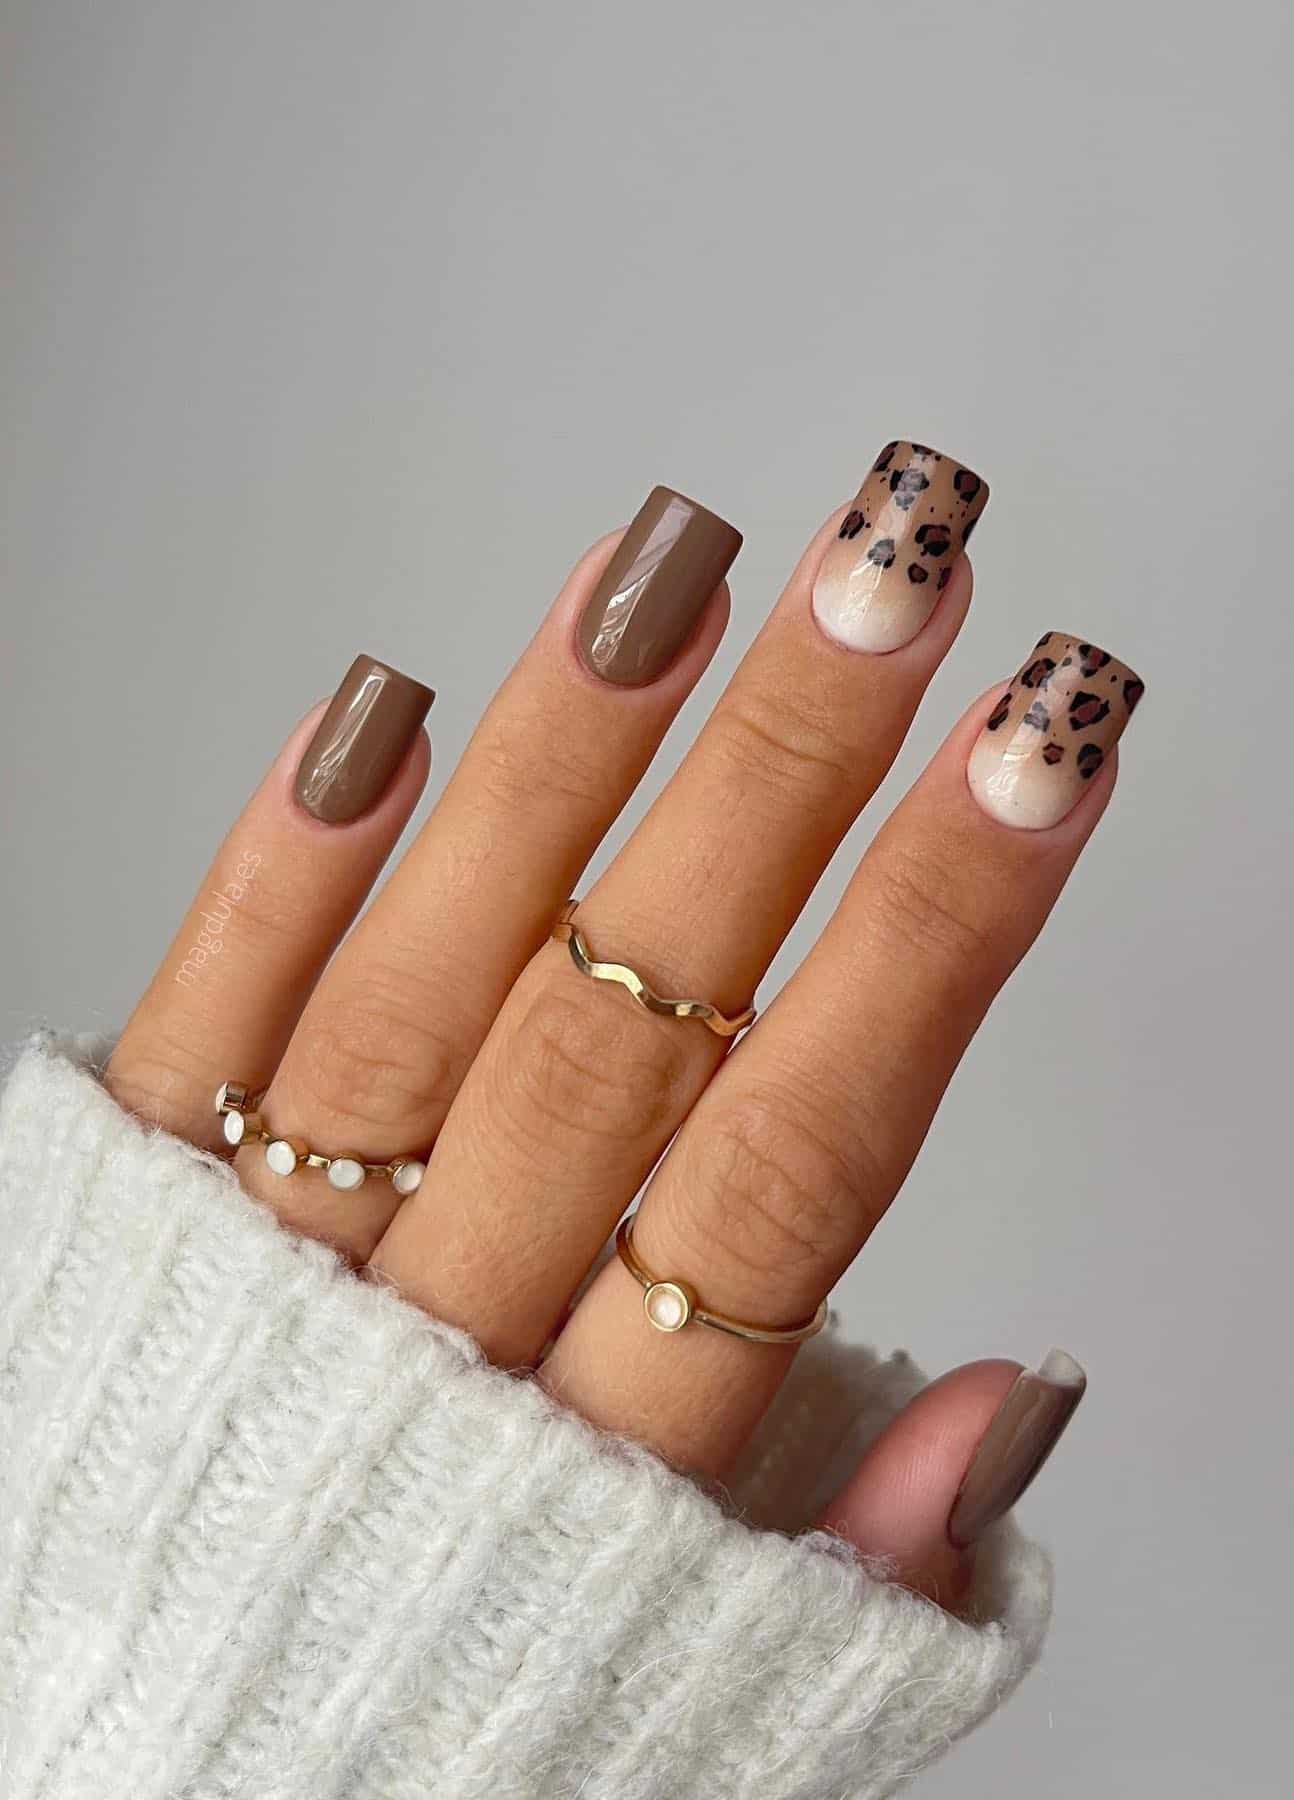 A hand with square nails painted with brown nail polish and two accent nails with white to brown ombre and animal print